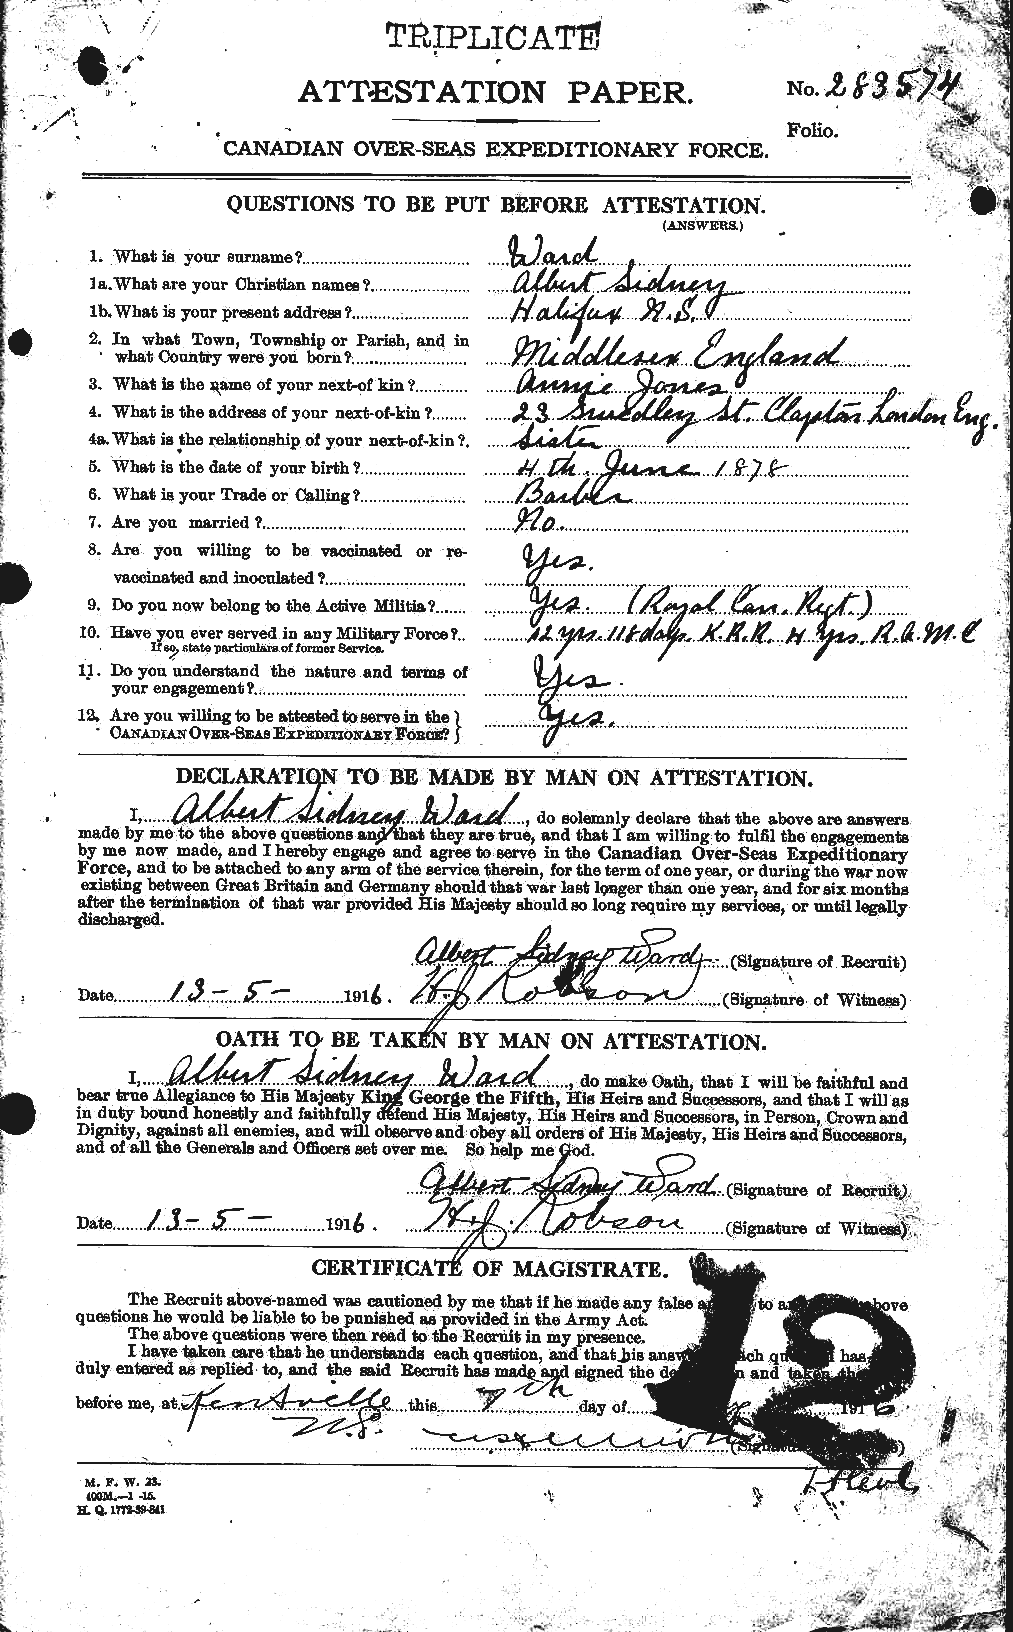 Personnel Records of the First World War - CEF 655103a